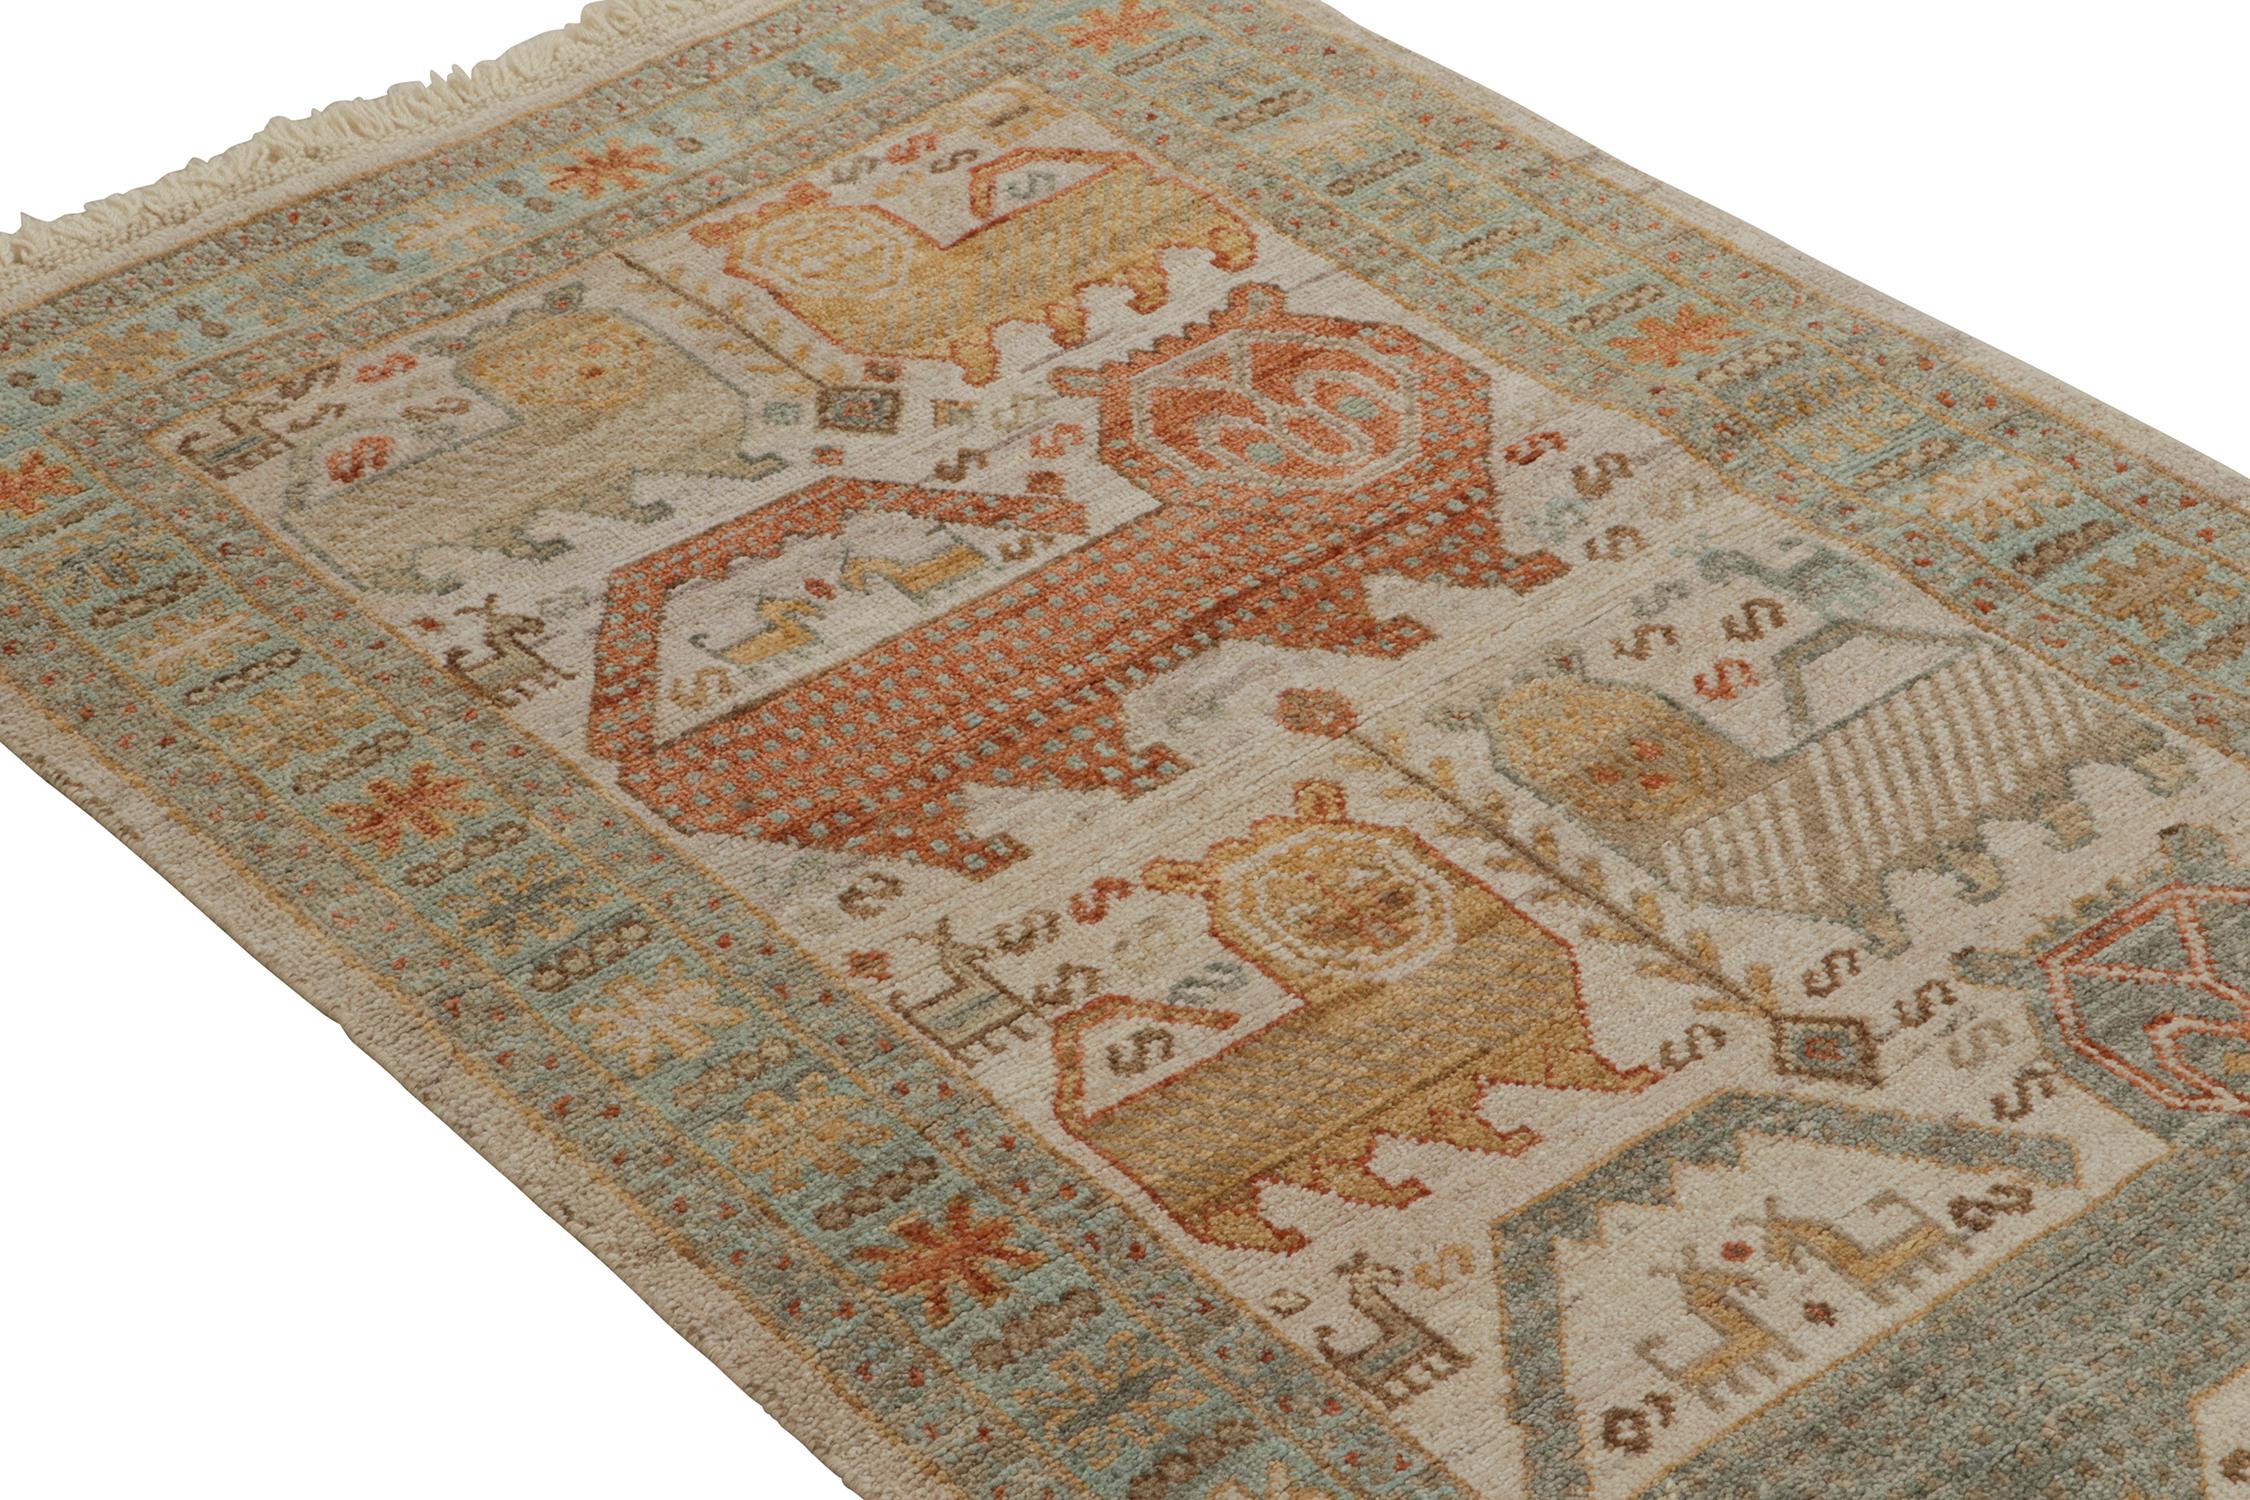 Hand-Knotted  Rug & Kilim’s Tribal style runner in Beige-Brown, Blue and Red Pictorials For Sale